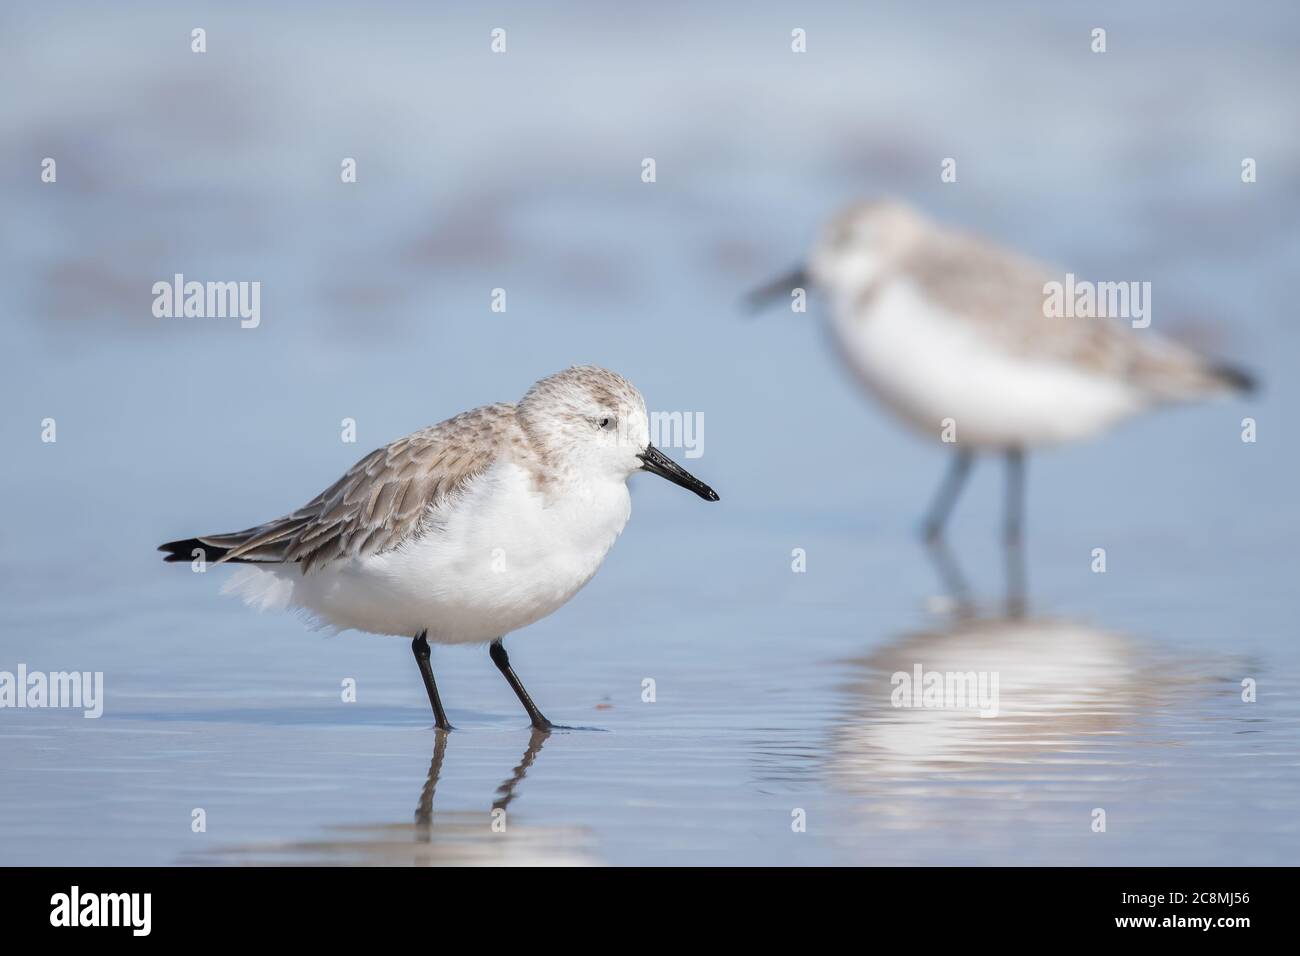 A sanderling searching the water at Canaveral. Stock Photo